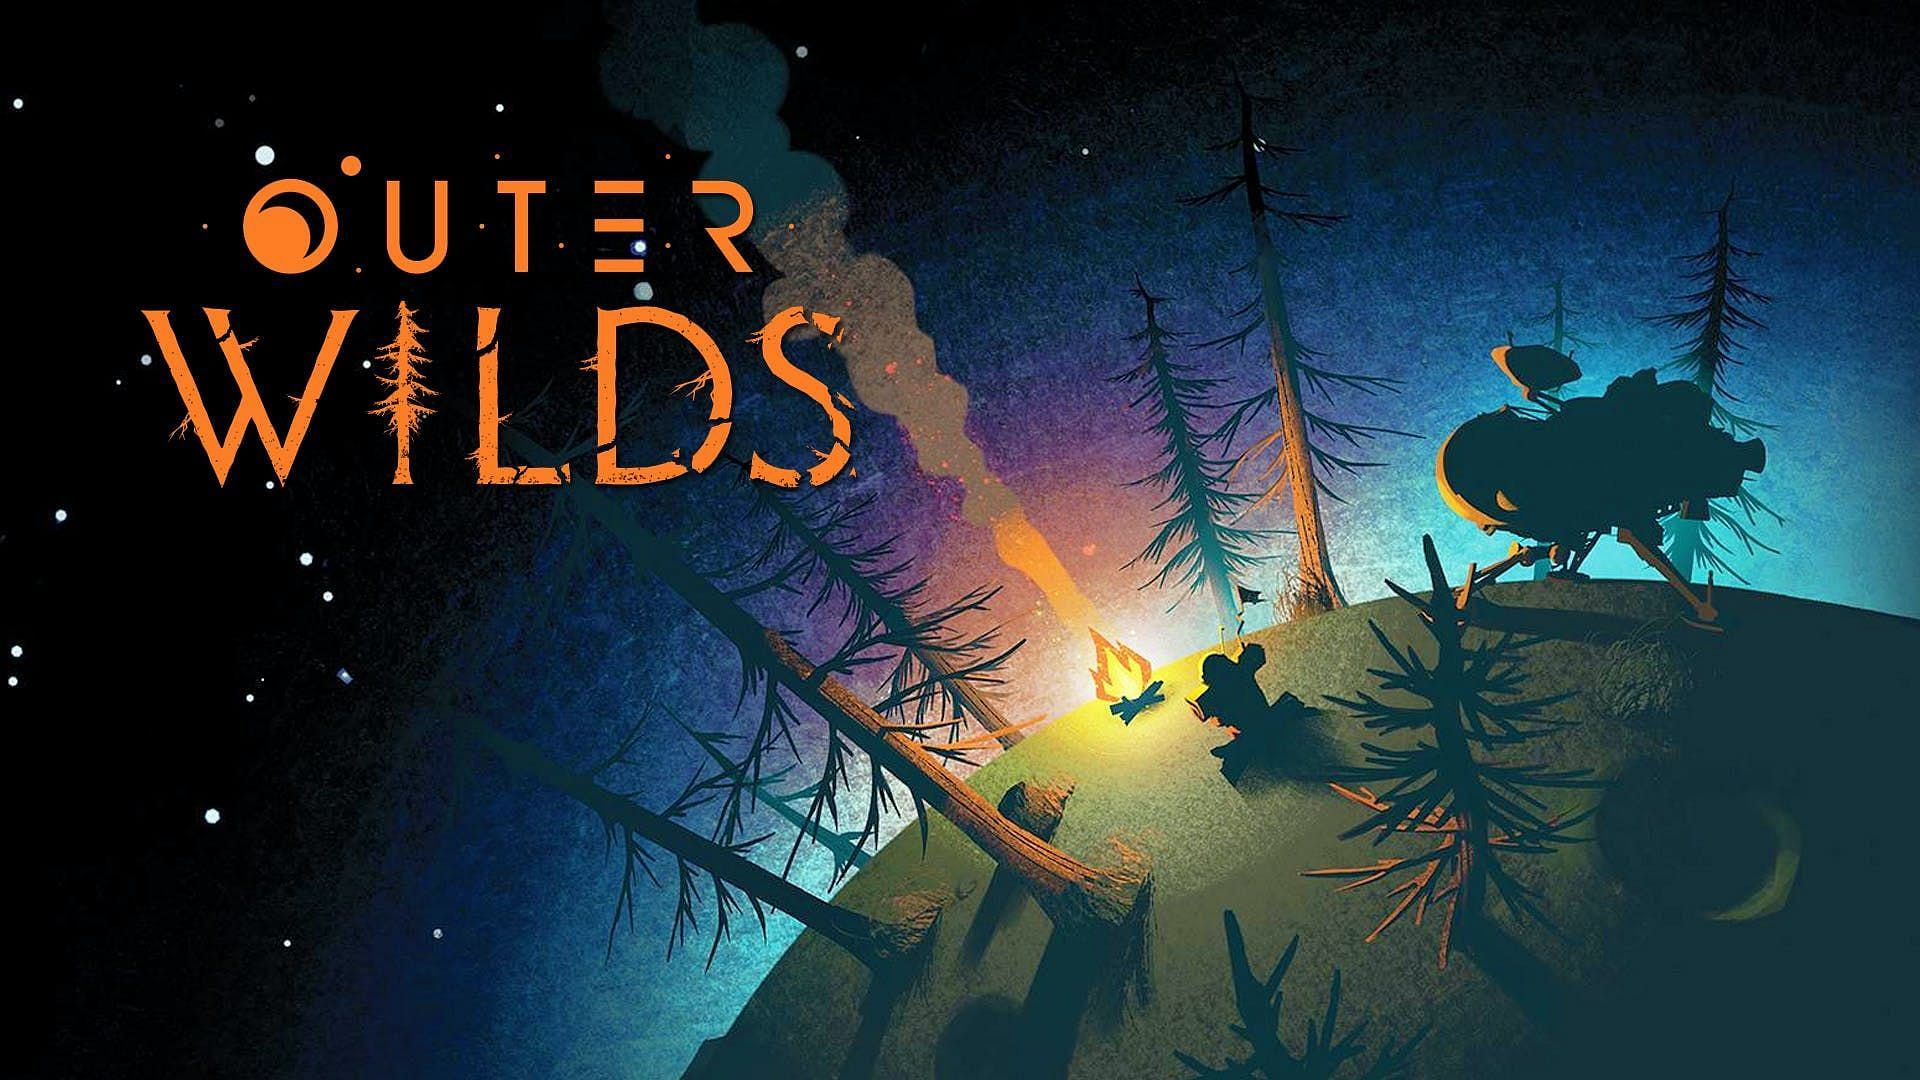 Camping in Space (Image via Outer Wilds)